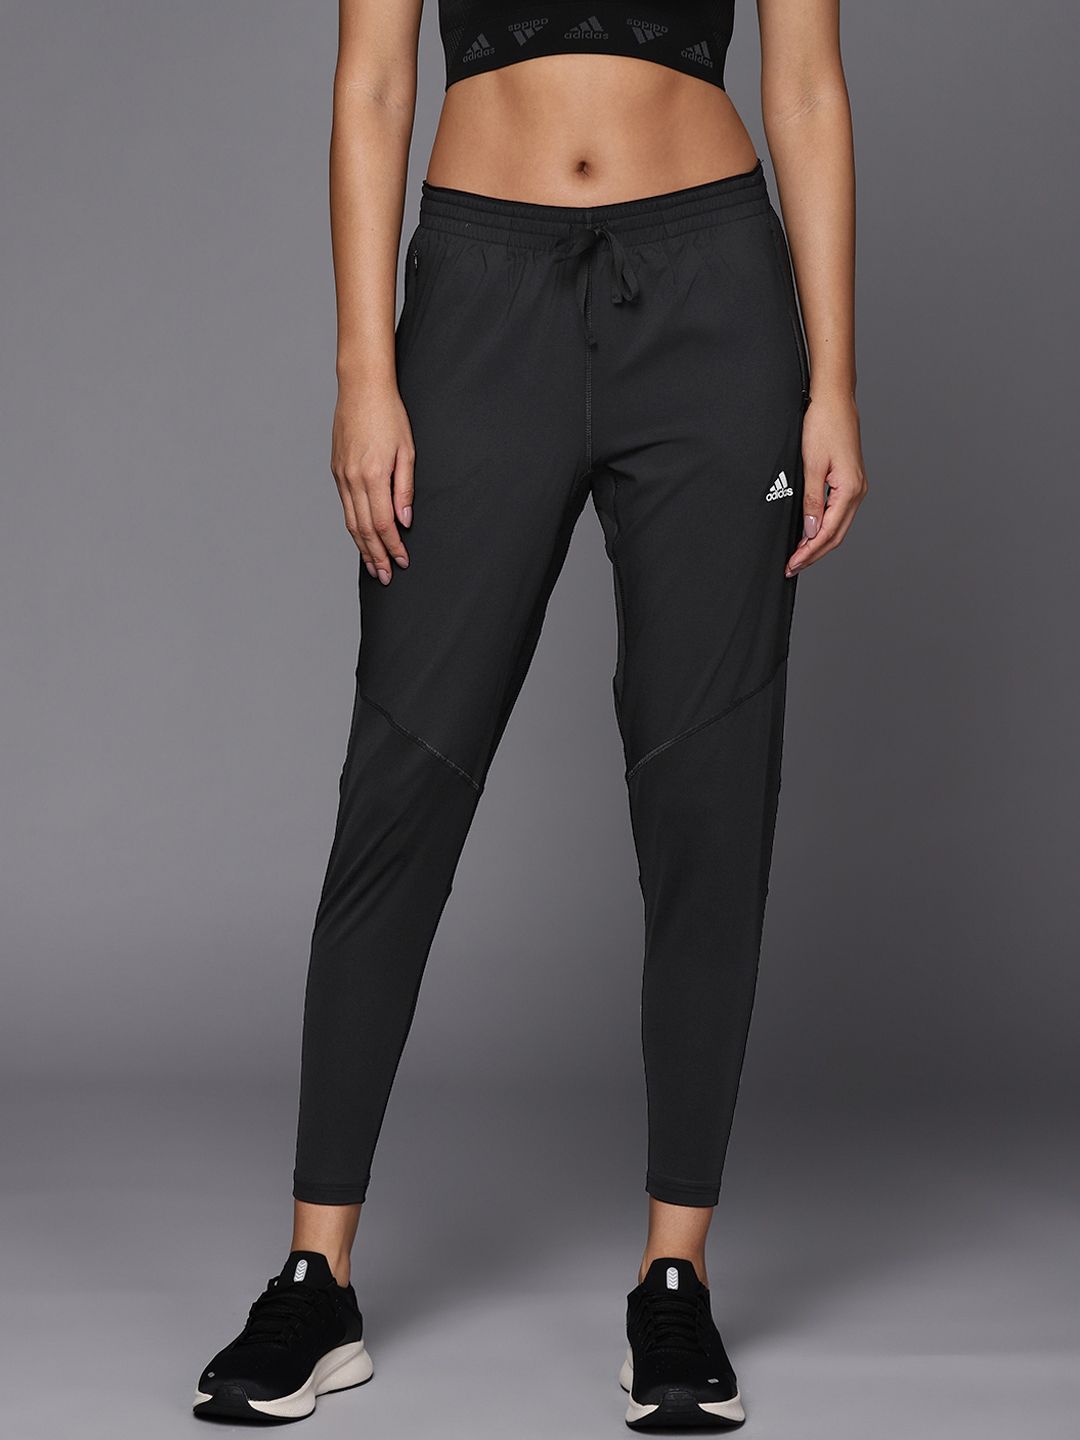 ADIDAS Women Black Fast Pant Solid Aeroready Running Track Pants Price in India